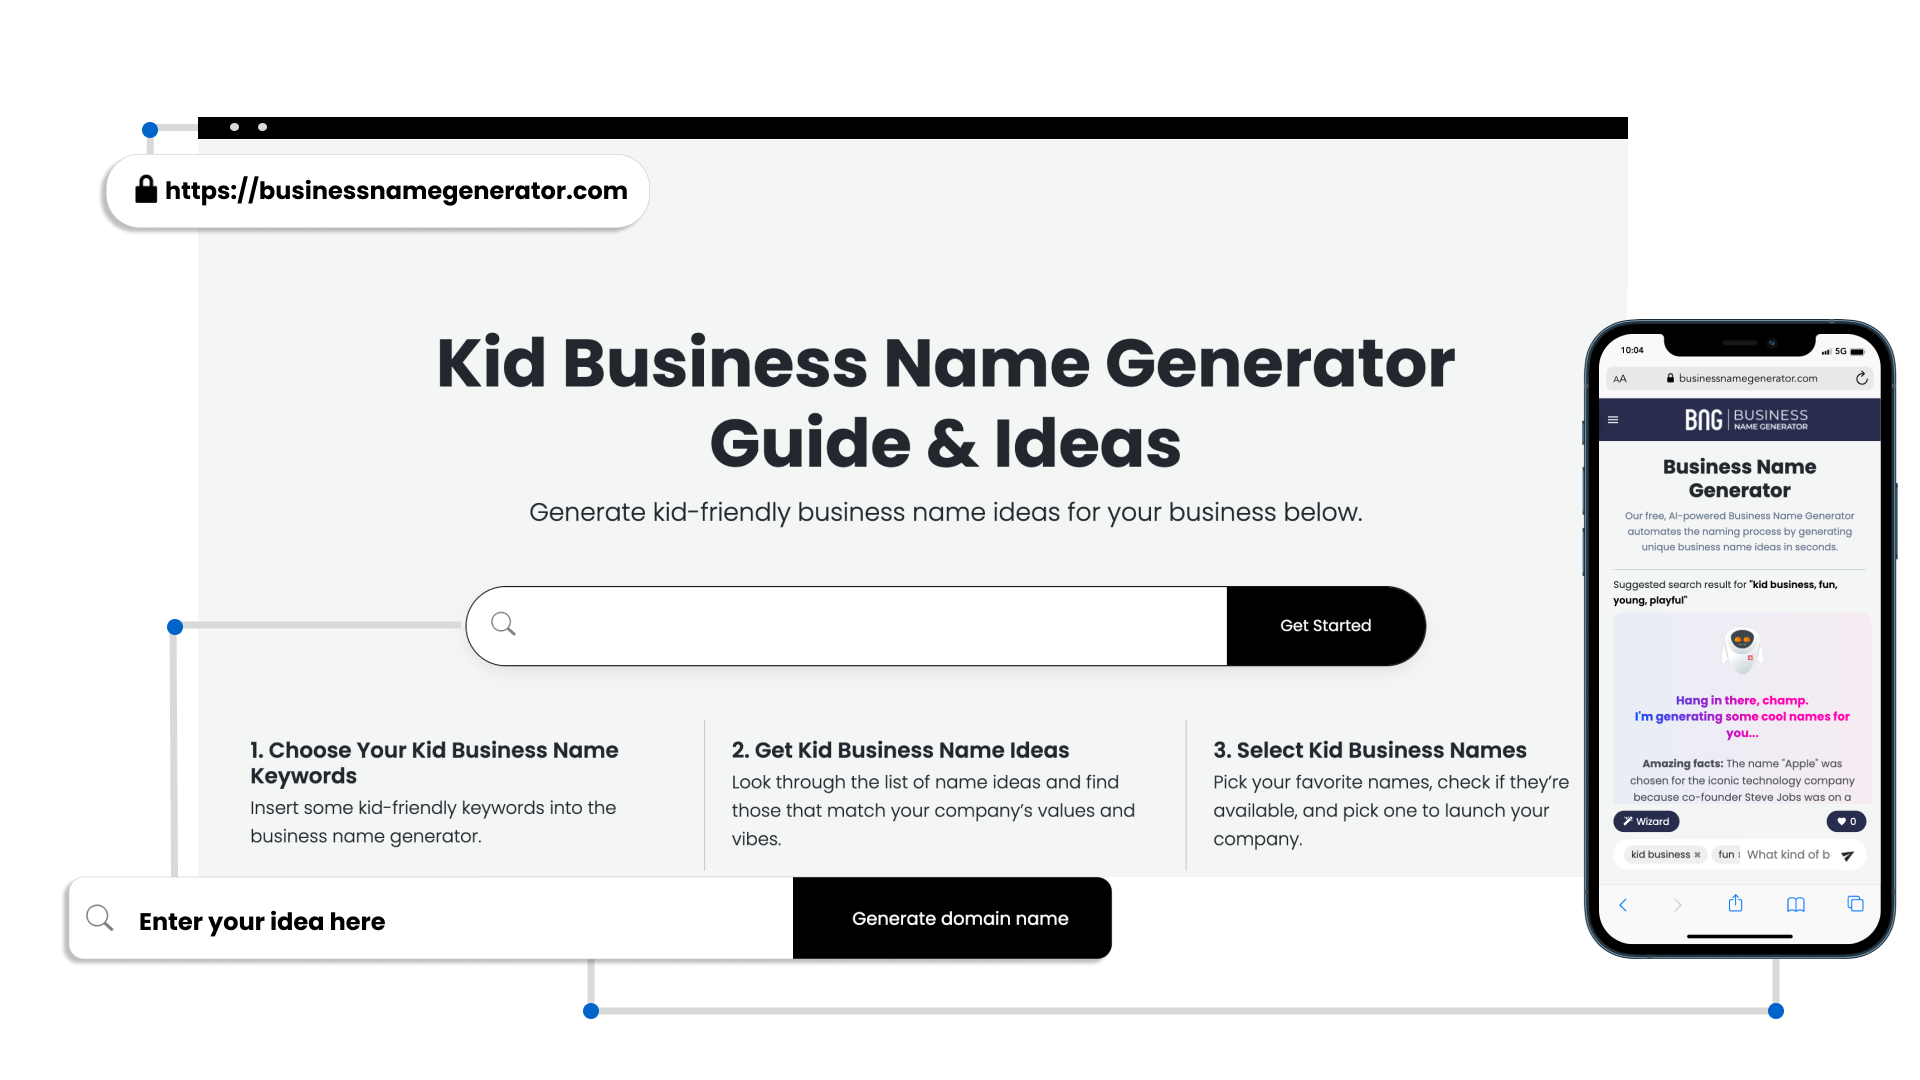 Benefits of Our Kid Business Name Generator